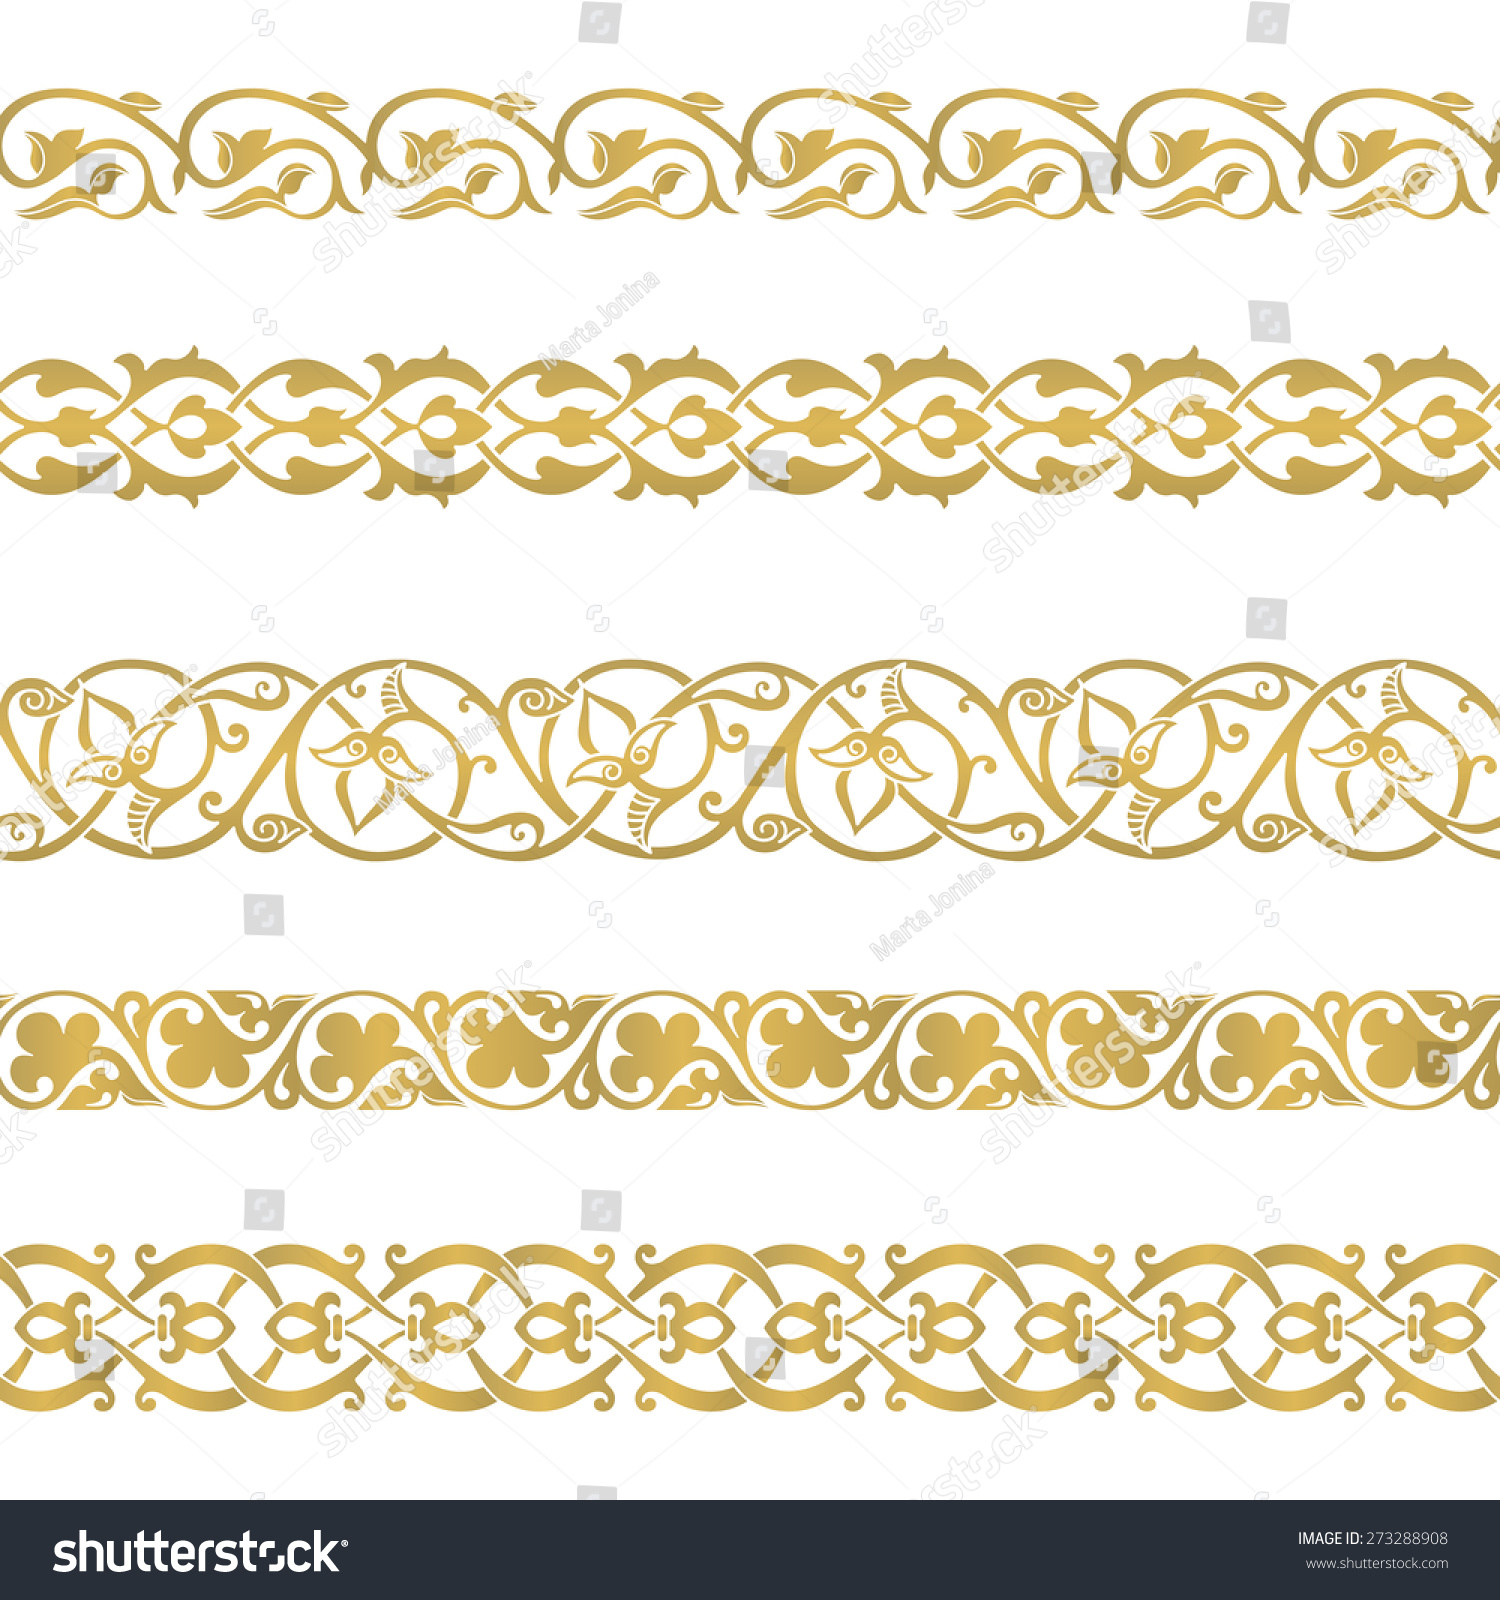 Seamless floral tiling borders. Inspired by old ottoman and arabian ornaments #273288908